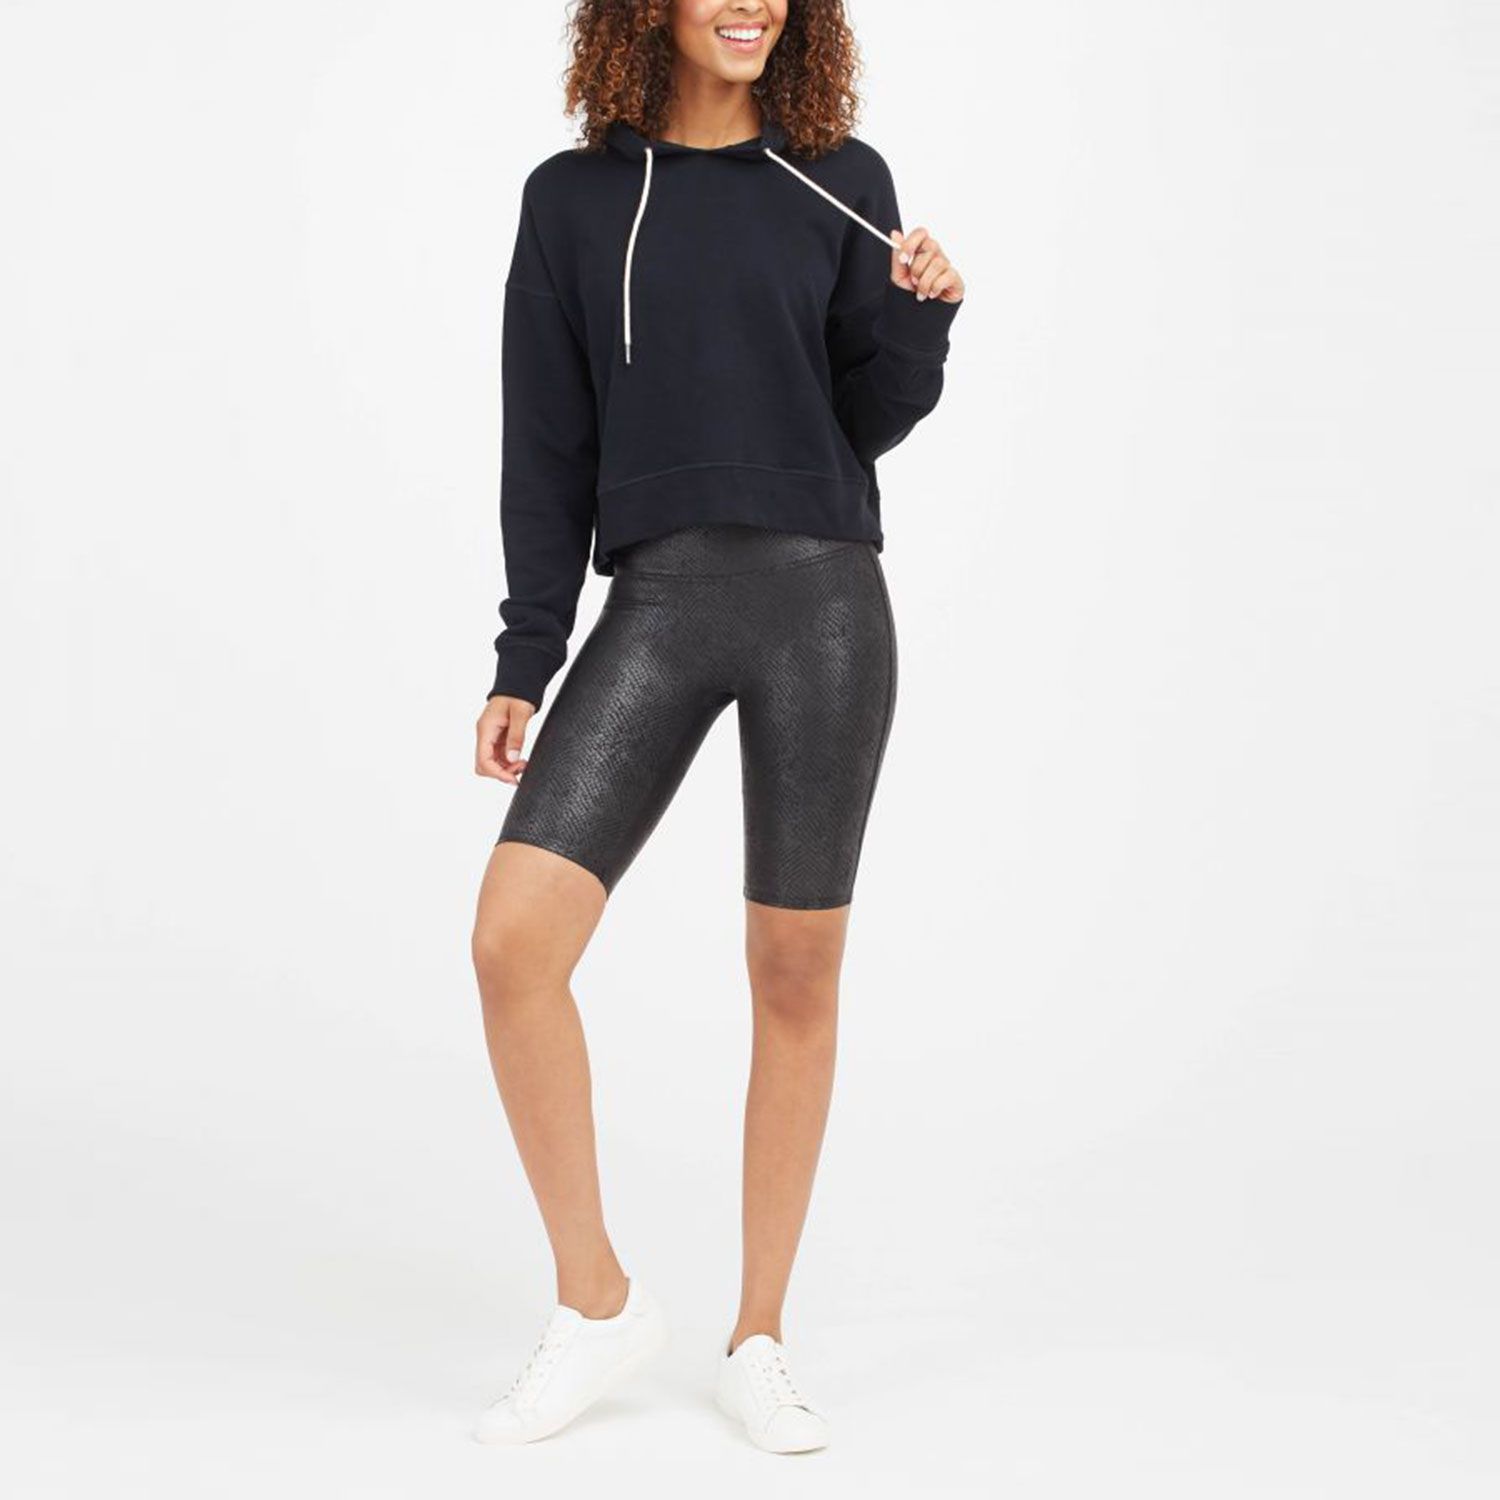 Spanx Active Workout Stretchy Shorts